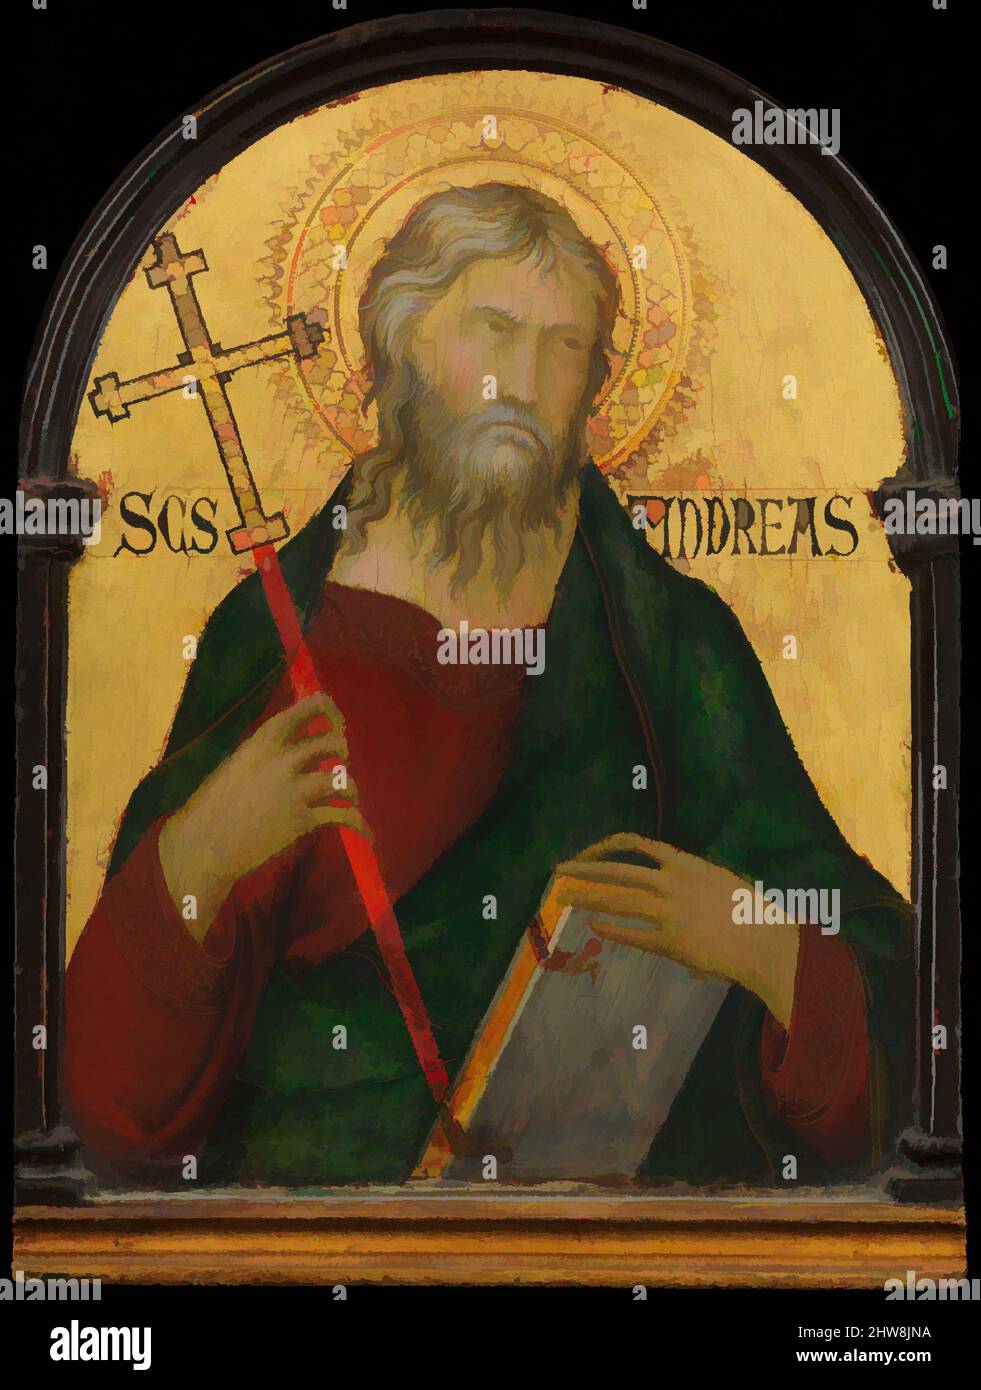 Art inspired by Saint Andrew, ca. 1317–19, Tempera on wood, gold ground, Overall, with arched top and engaged frame, 11 3/4 x 8 3/4 in. (29.8 x 22.2 cm); painted surface 10 3/8 x 7 7/8 in. (26.4 x 20 cm), Paintings, Workshop of Simone Martini (Italian, Siena, active by 1315–died 1344, Classic works modernized by Artotop with a splash of modernity. Shapes, color and value, eye-catching visual impact on art. Emotions through freedom of artworks in a contemporary way. A timeless message pursuing a wildly creative new direction. Artists turning to the digital medium and creating the Artotop NFT Stock Photo